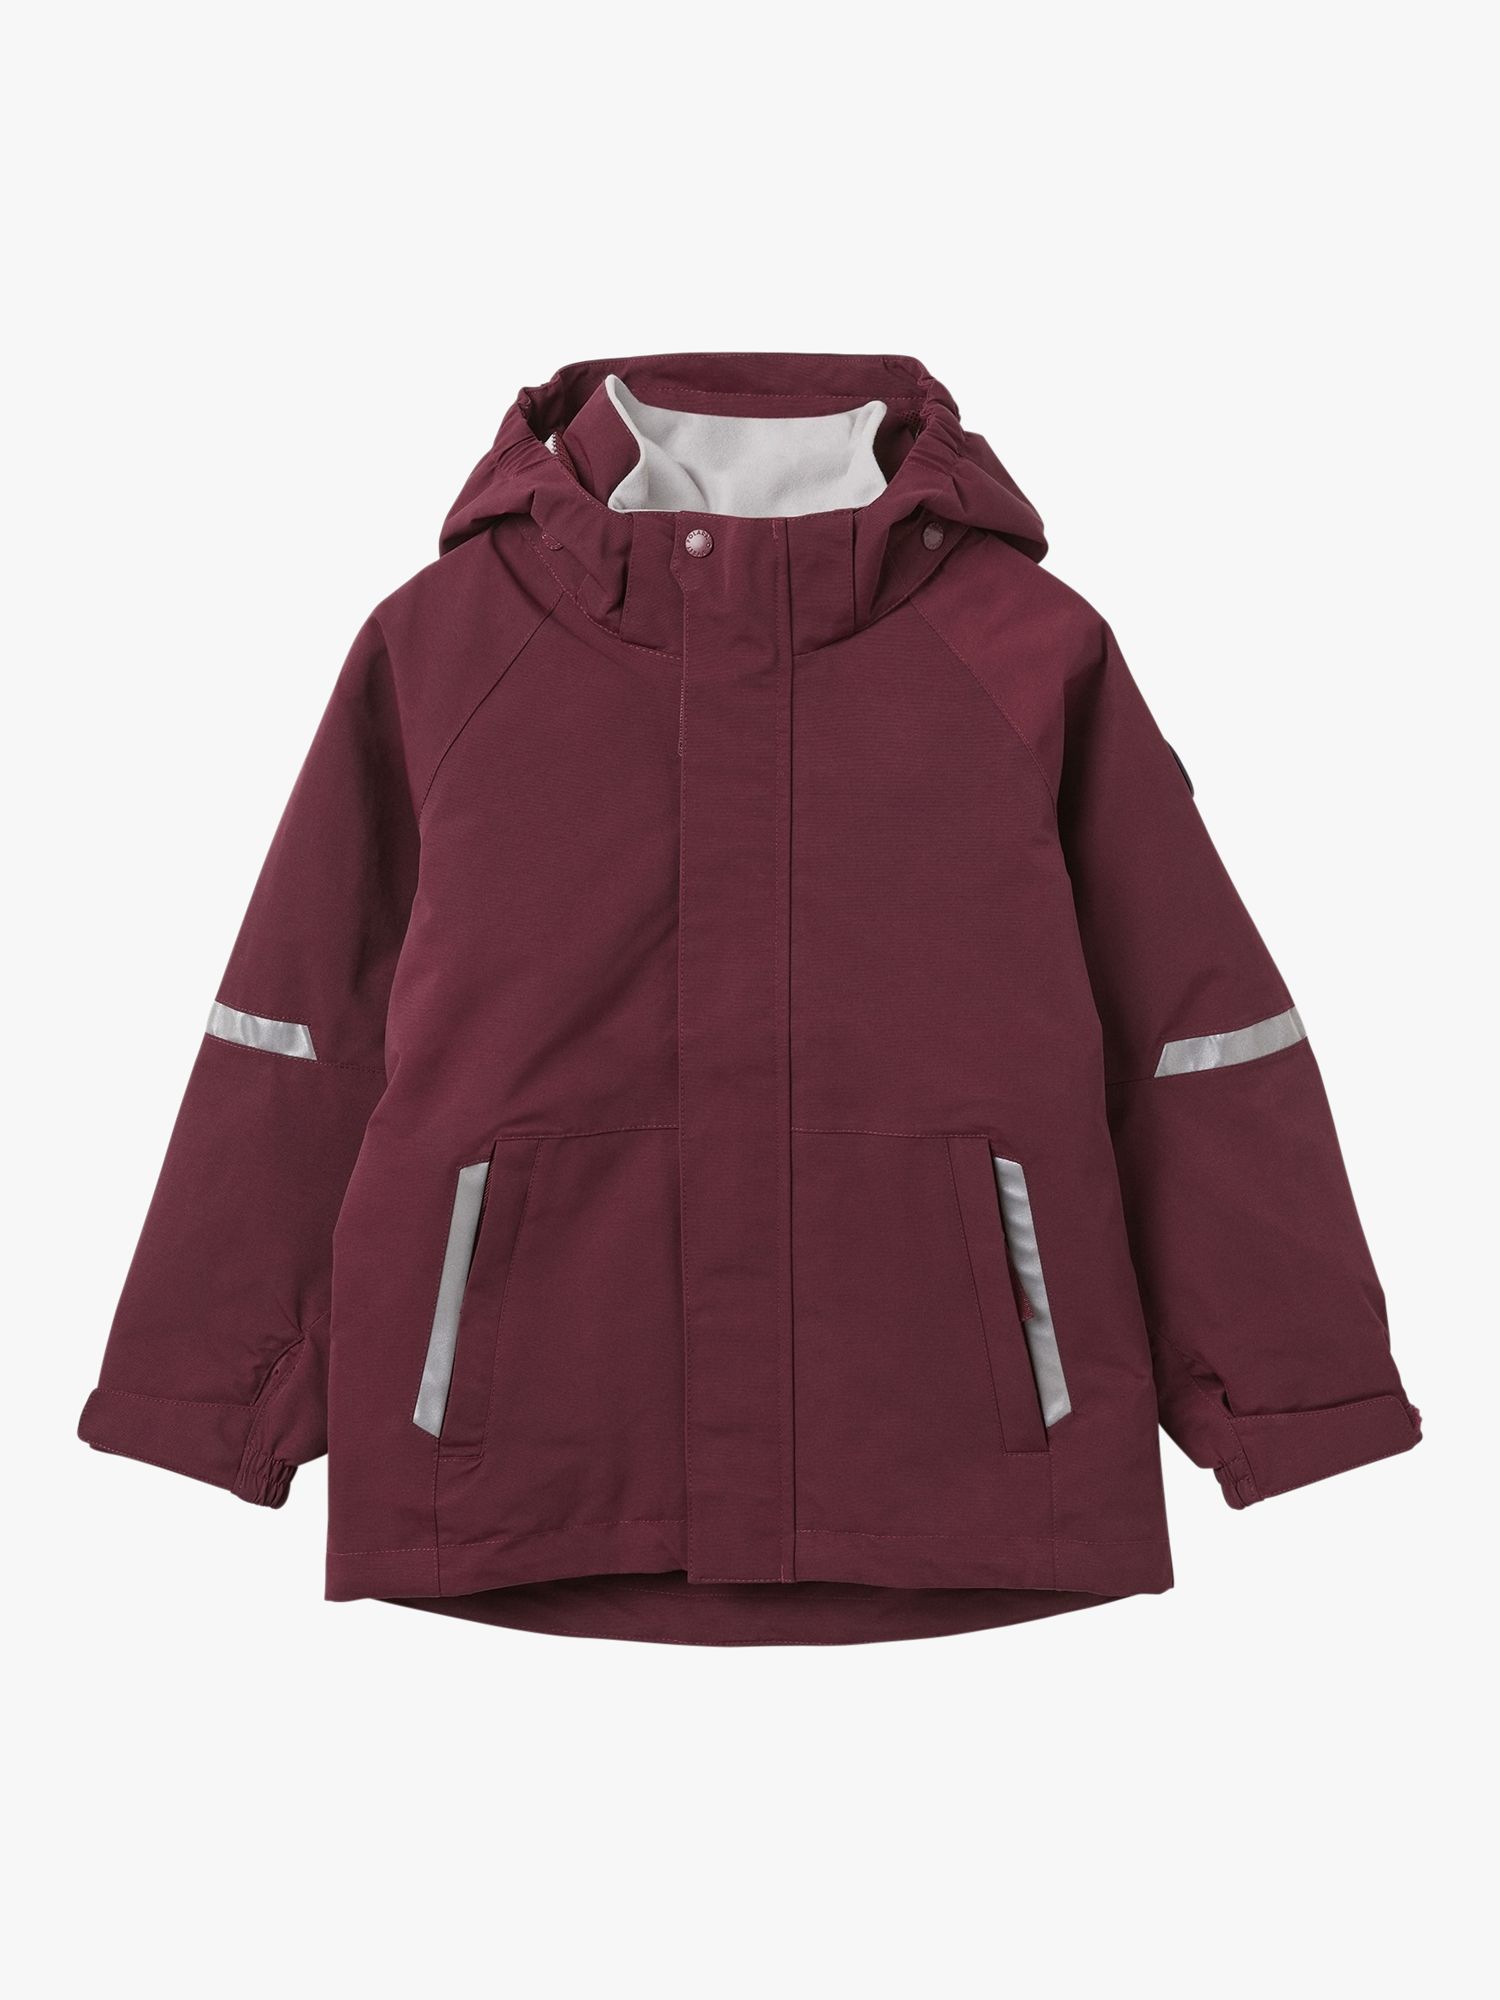 Polarn O. Pyret Kids' Waterproof Shell Coat, Red, 9-12 months